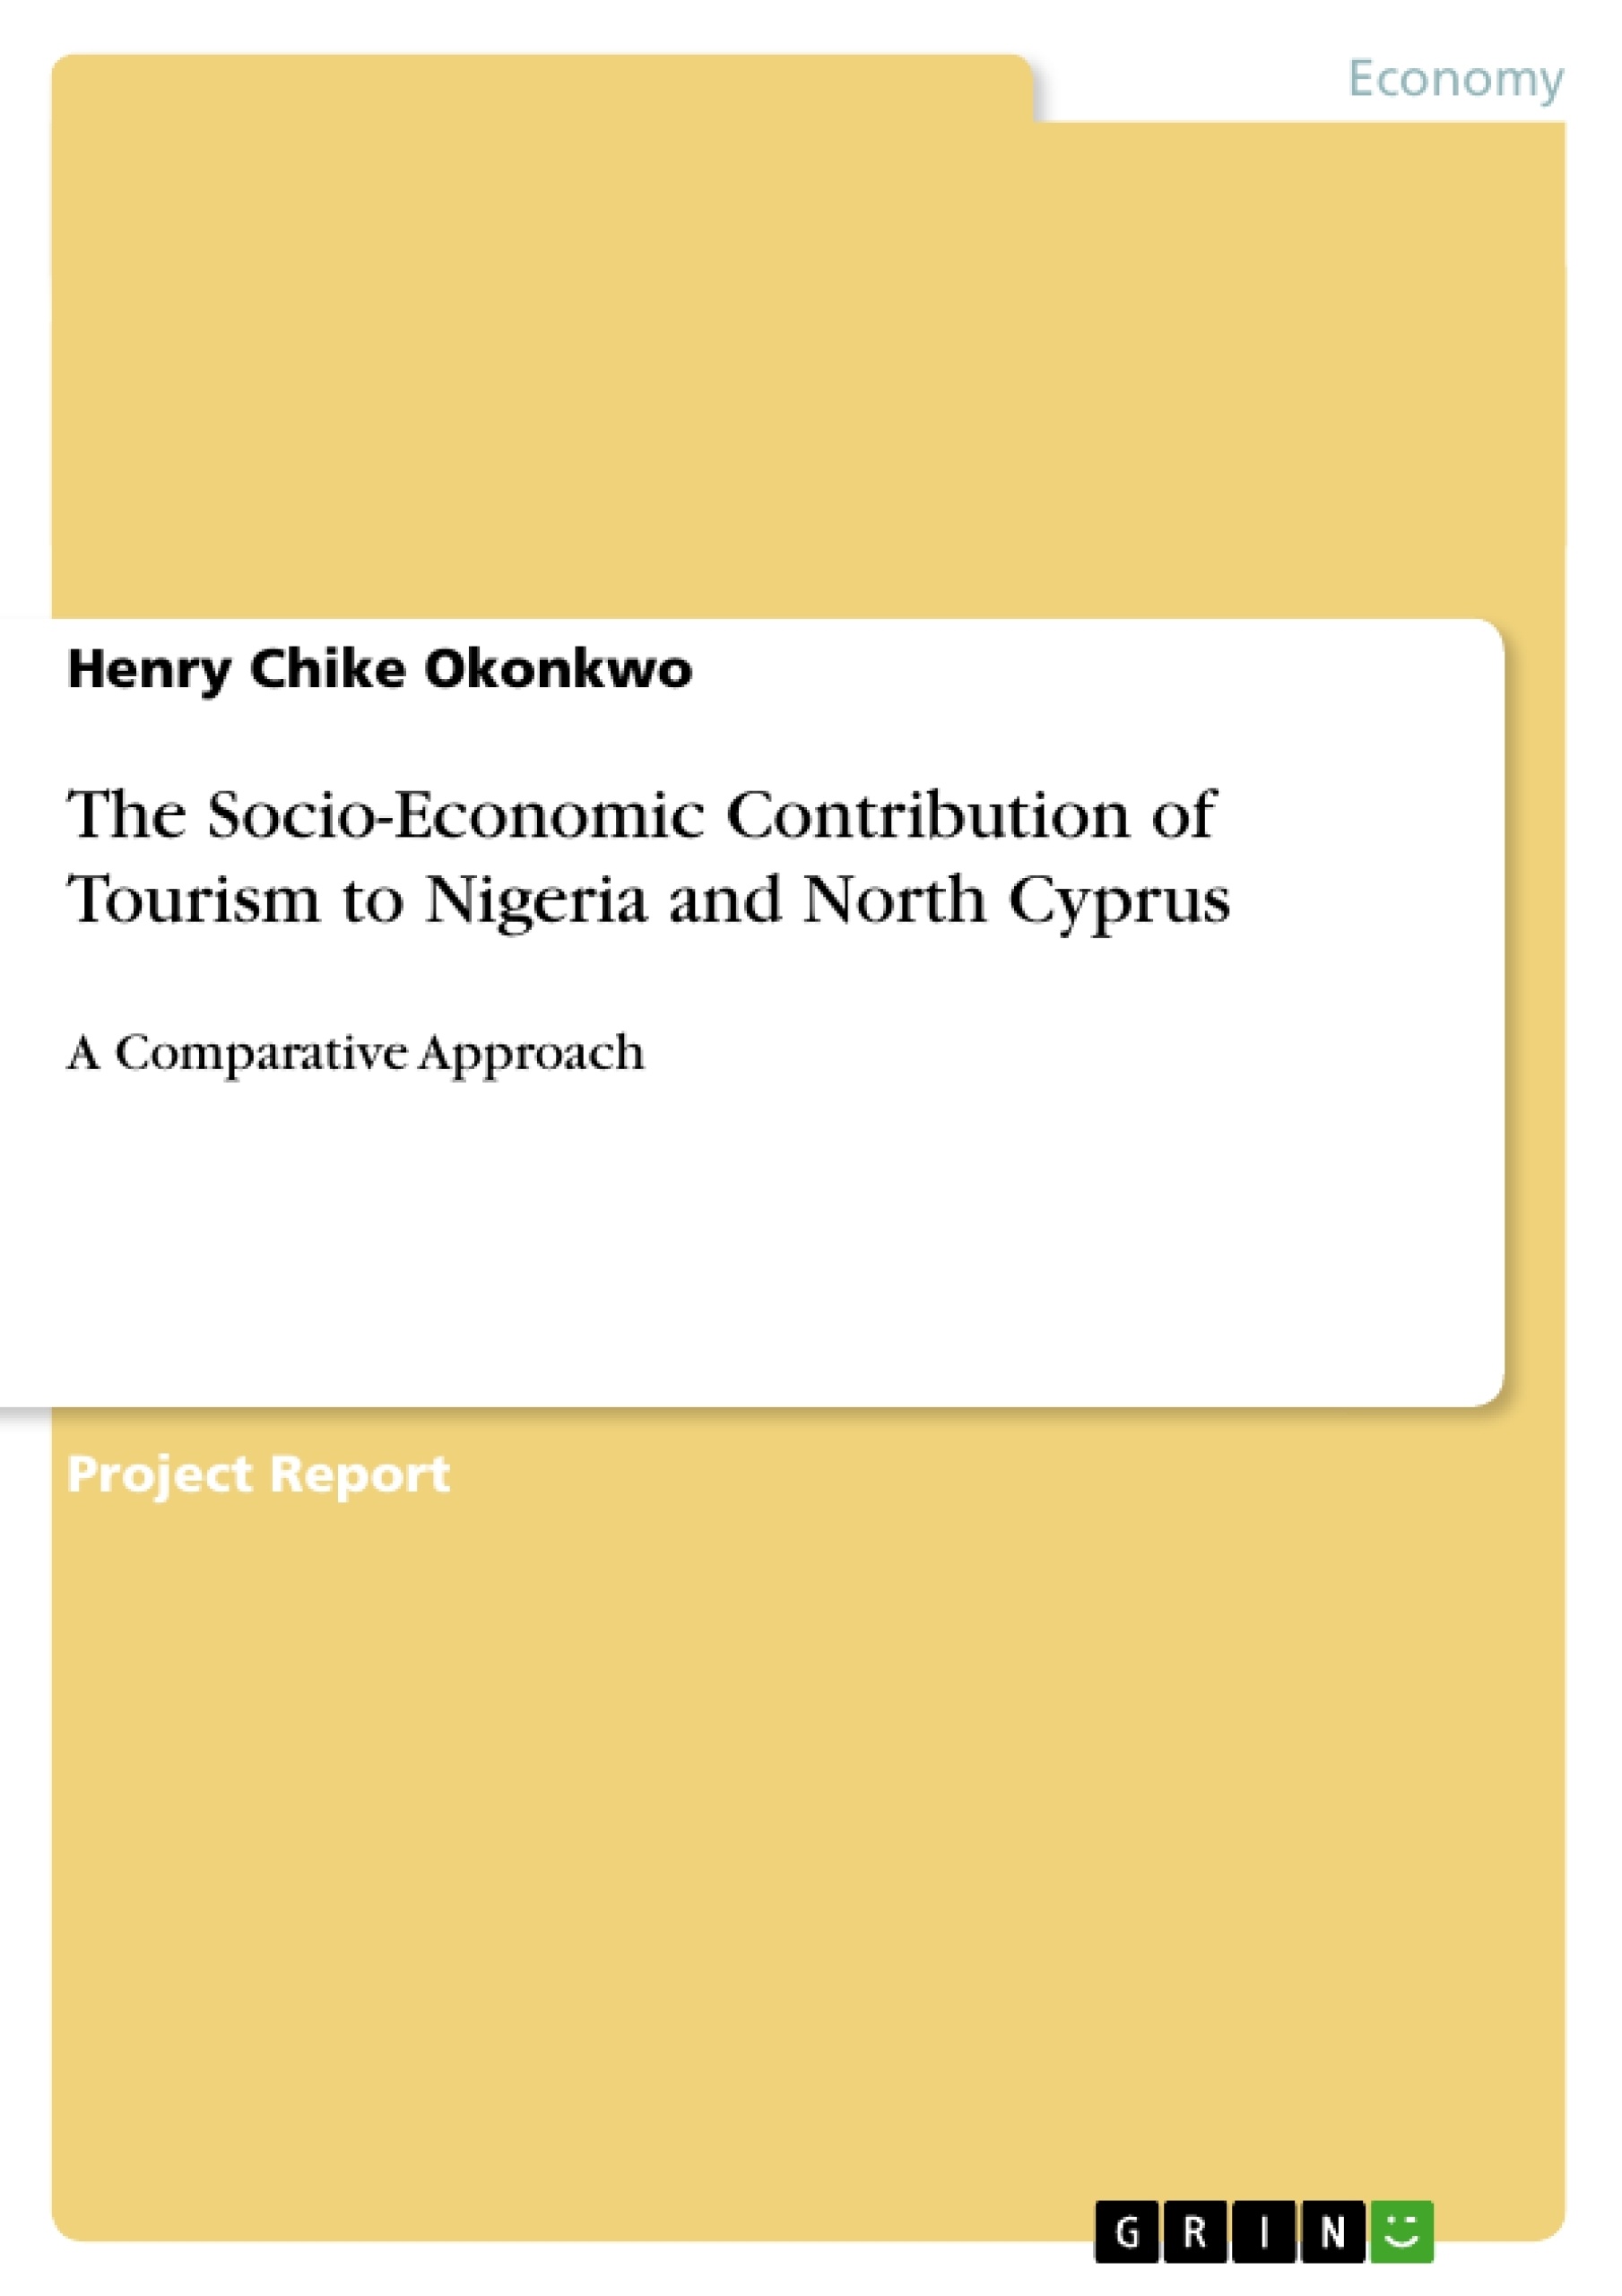 Title: The Socio-Economic Contribution of Tourism to Nigeria and North Cyprus